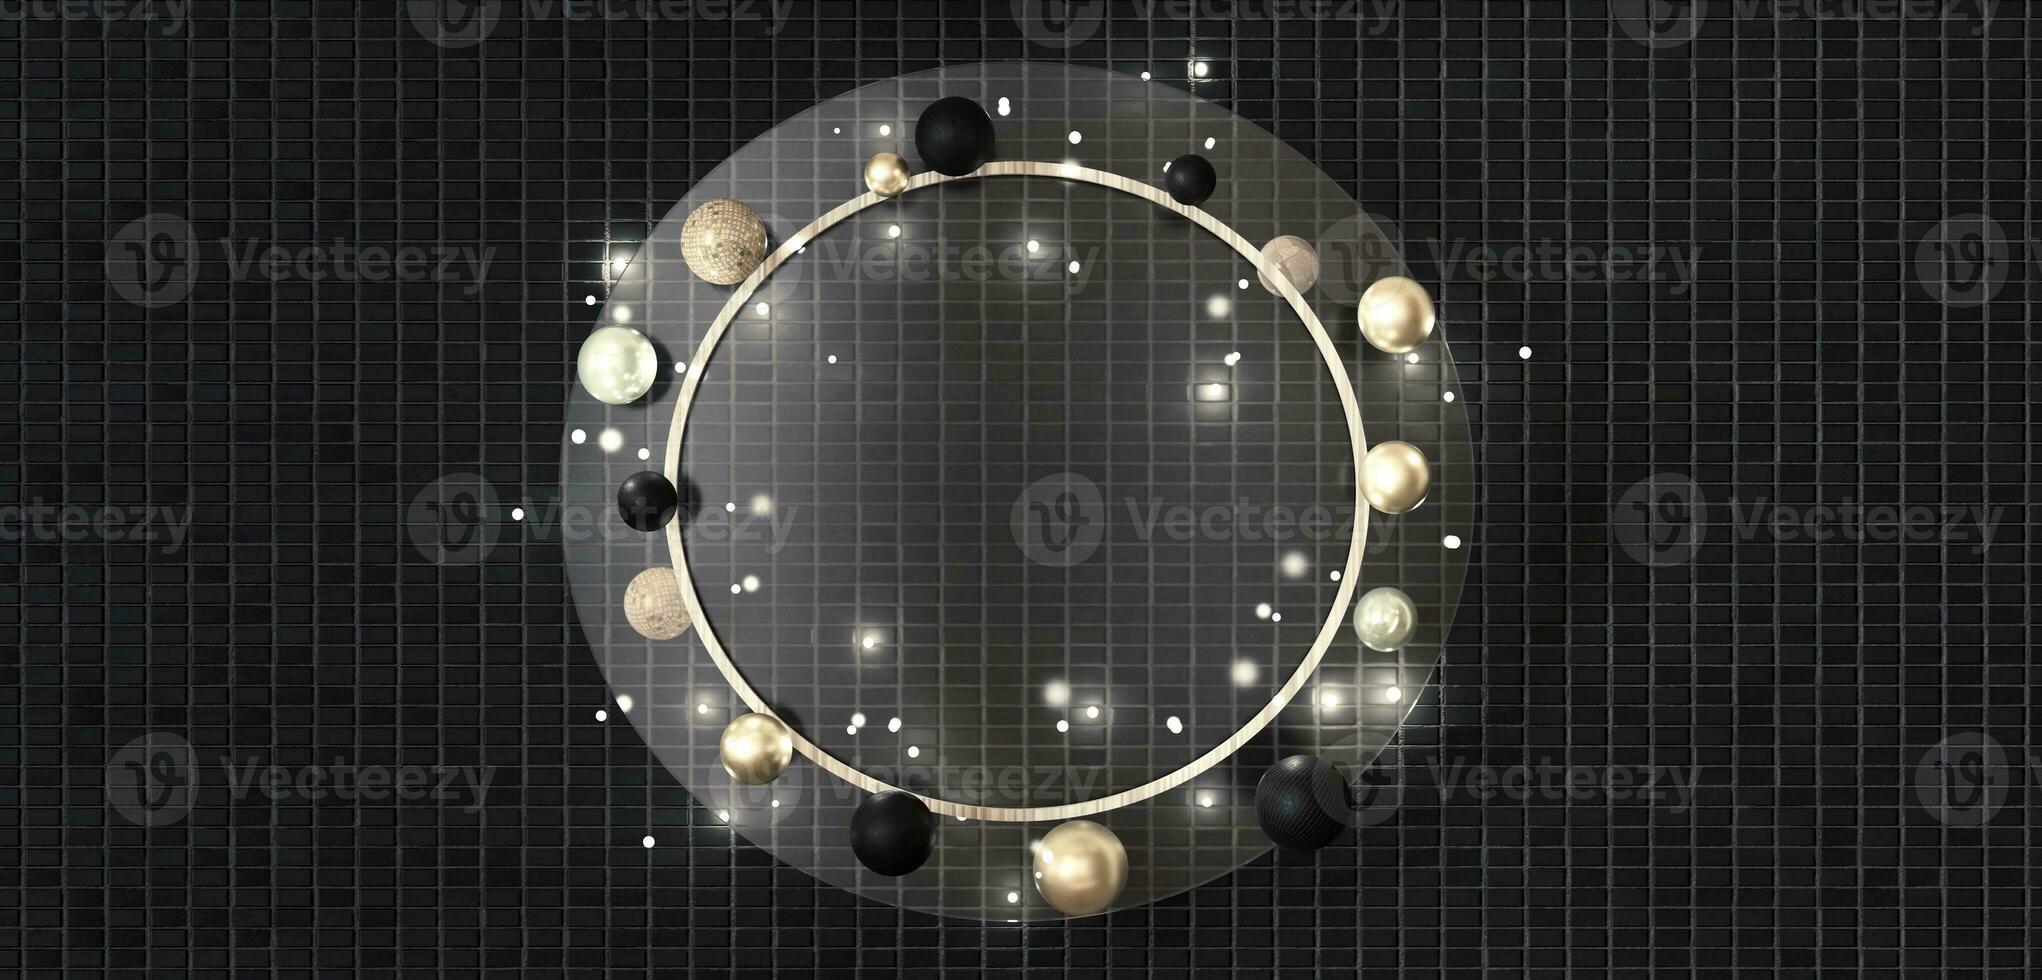 Circular glass frame for messages and pictures with beads and pearls around Modern decorative background 3d illustration photo